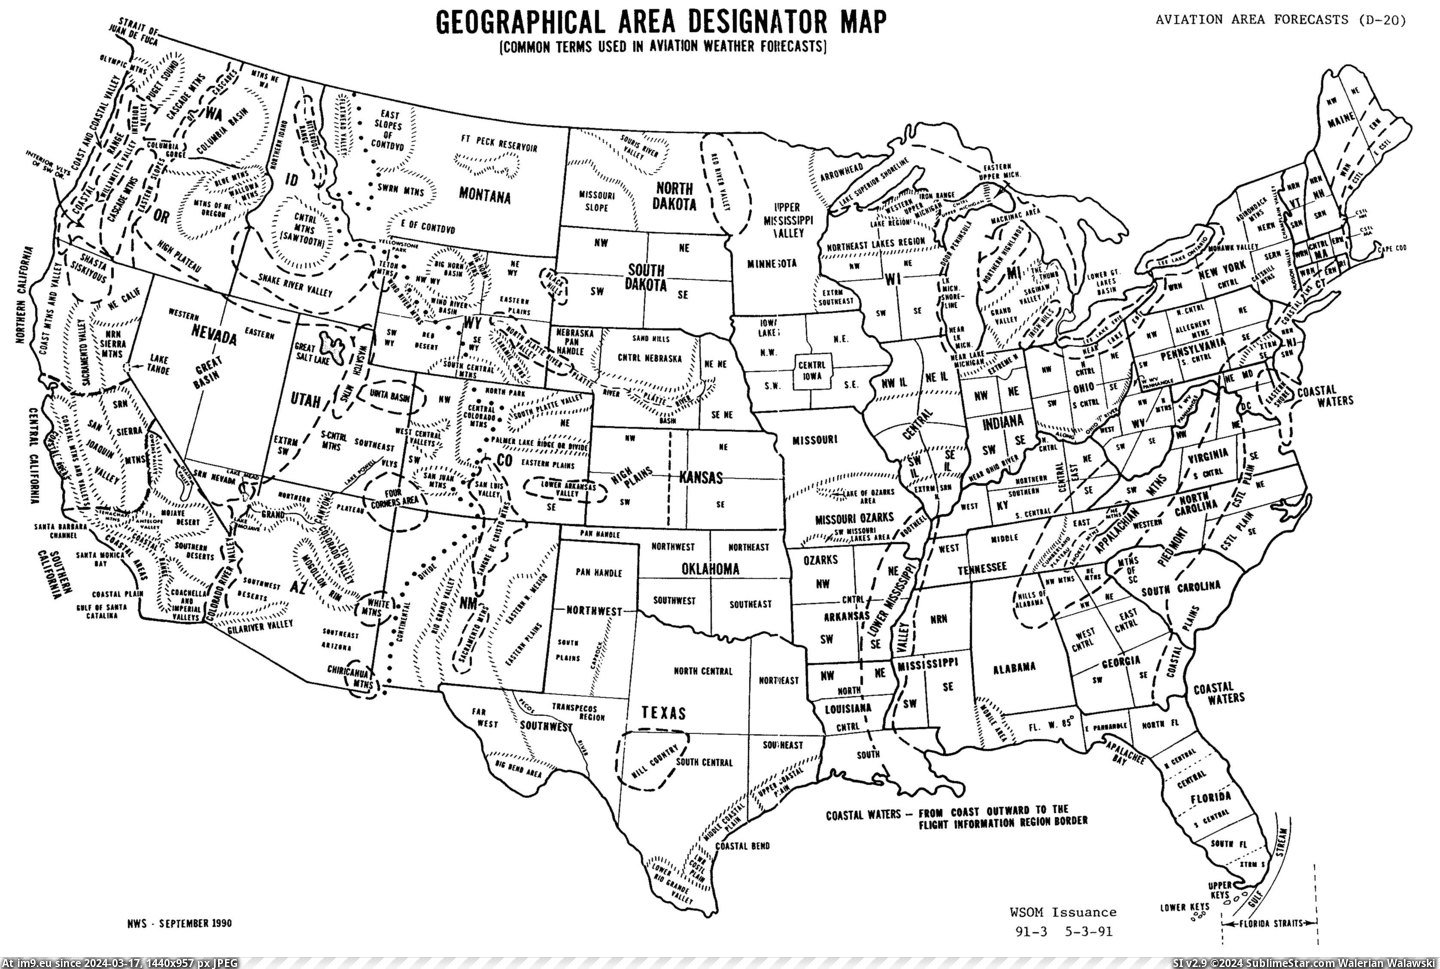 #National #States #United #Labeled #Aviation #Weather #Areas #Geographic [Mapporn] Geographic Areas of the United States labeled with terminology used in aviation weather forecasts, National Weather Se Pic. (Image of album My r/MAPS favs))